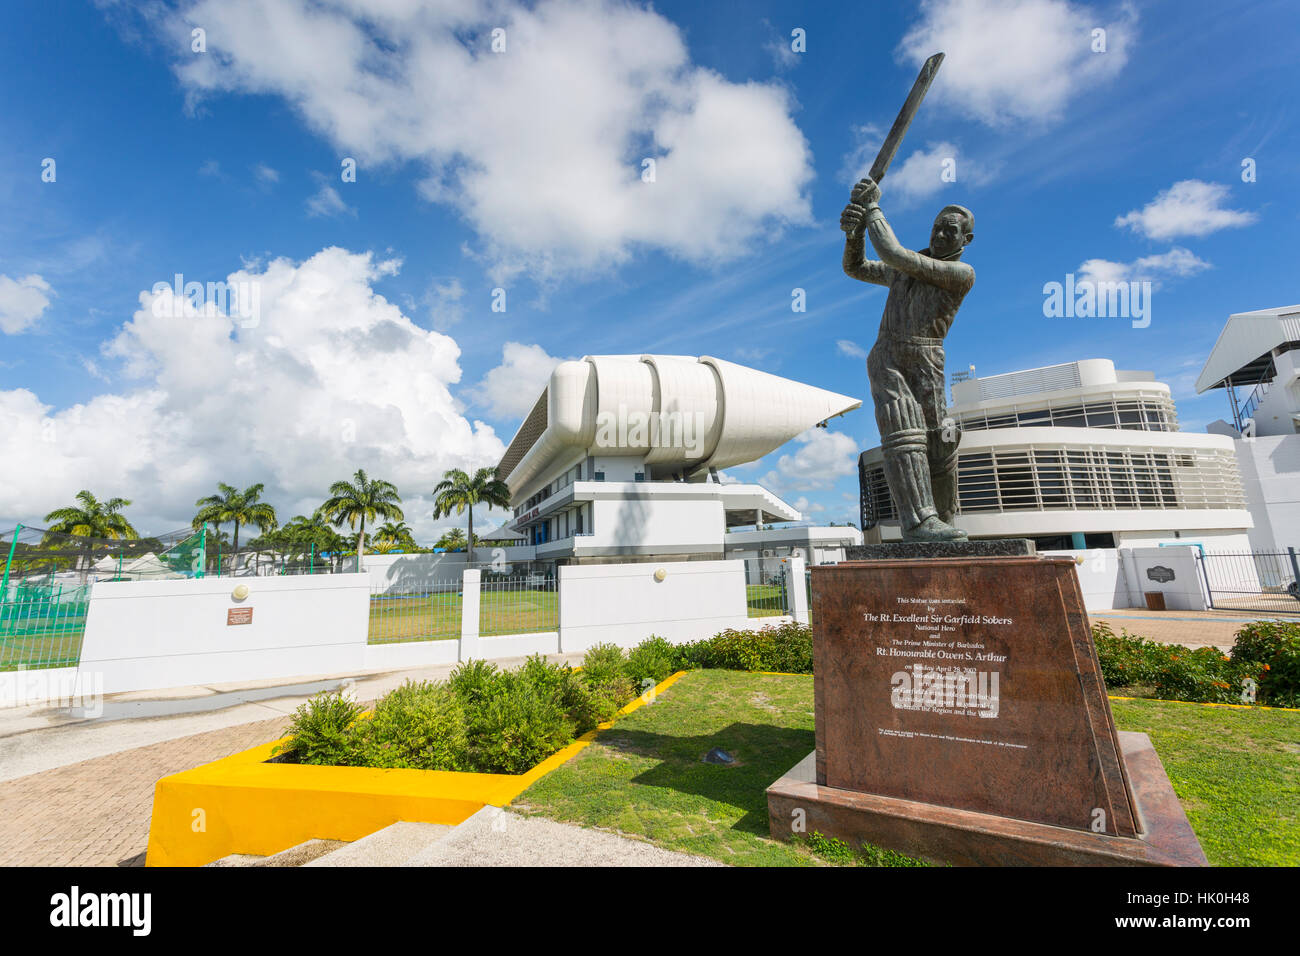 Garfield Sobers statue and The Kensington Oval Cricket Ground, Bridgetown, St. Michael, Barbados, West Indies, Caribbean Stock Photo